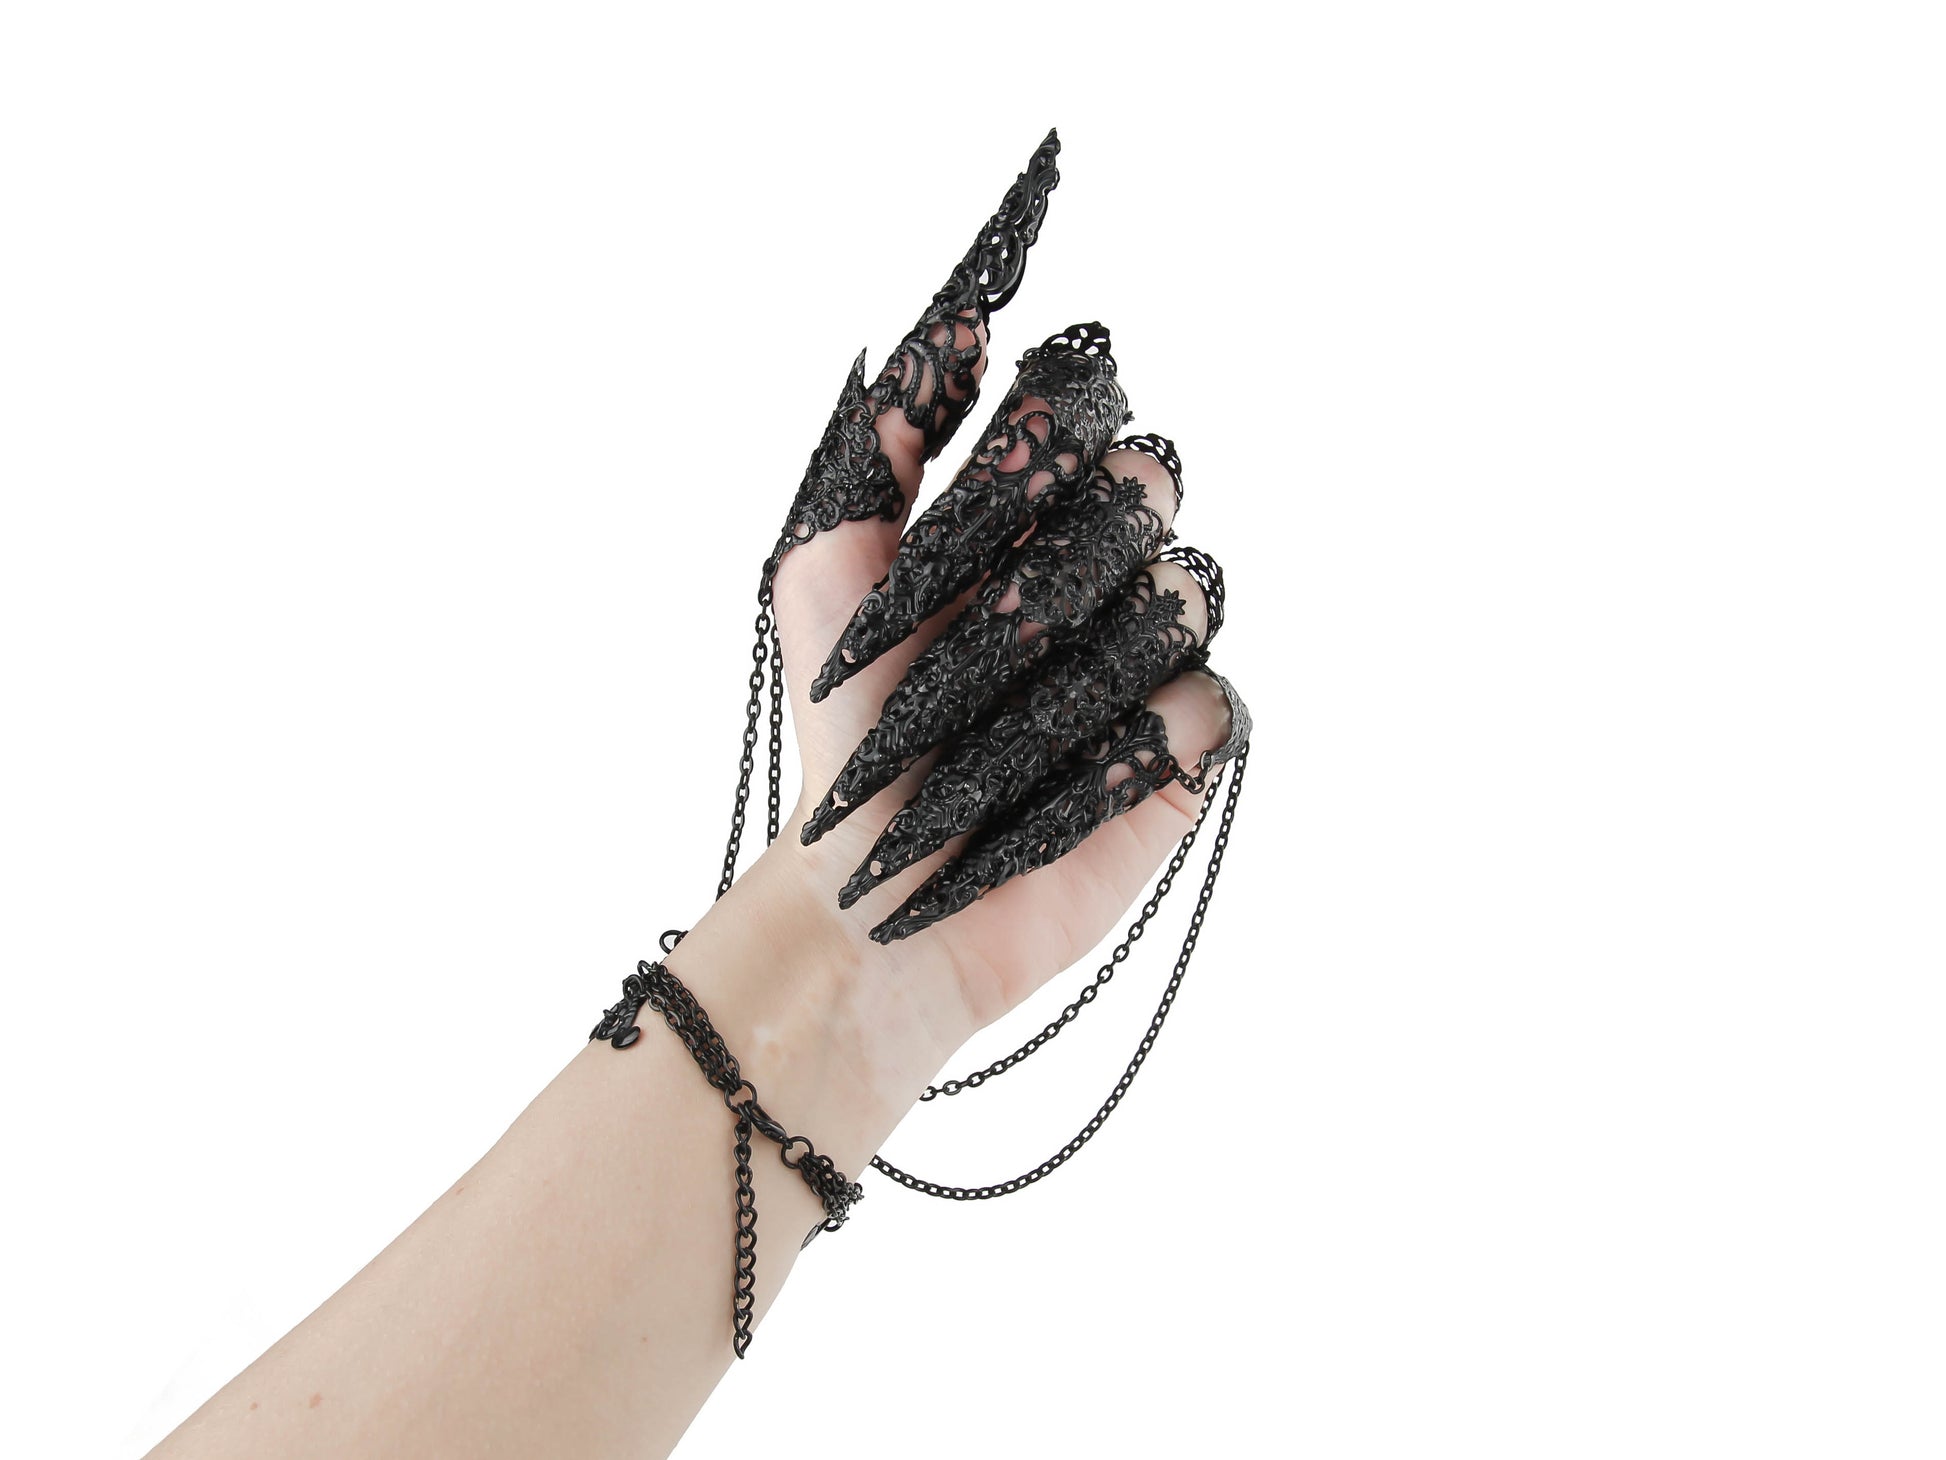 This striking black metal glove with full finger claw rings by Myril Jewels exemplifies gothic opulence. Perfect for a dramatic Halloween or punk ensemble, its intricate design is ideal for those who embrace a bold, neo-gothic style, from festival outfits to drag queen glamour, or as a standout gift for the darkly inclined